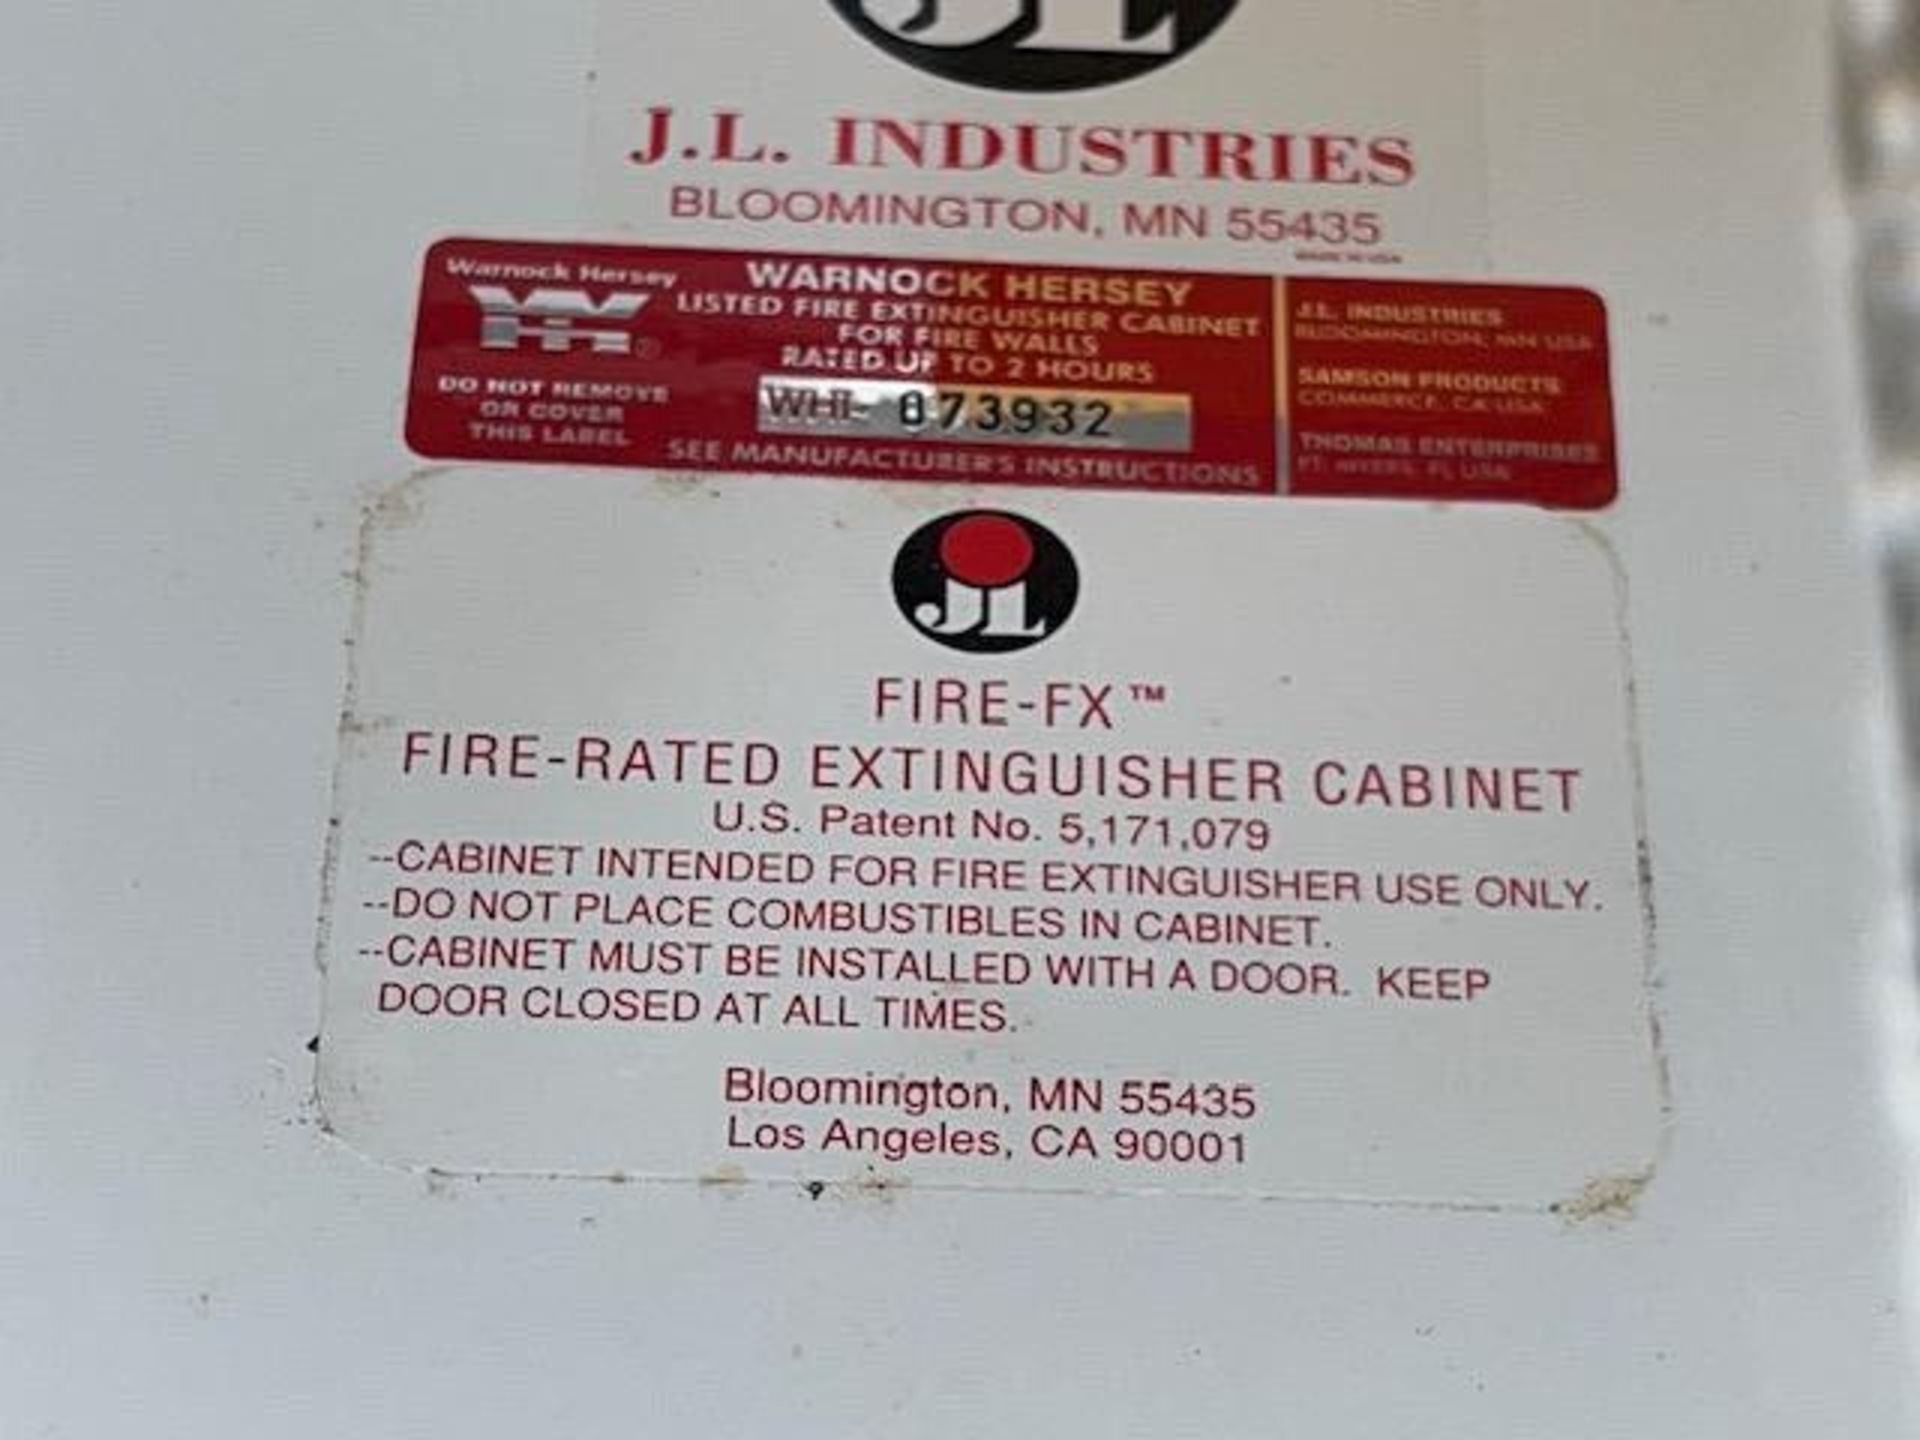 Lot of (16) NEW IN BOX JL Industries Fire-FX Fire-Rated Extinguisher Cabinets - Image 6 of 6